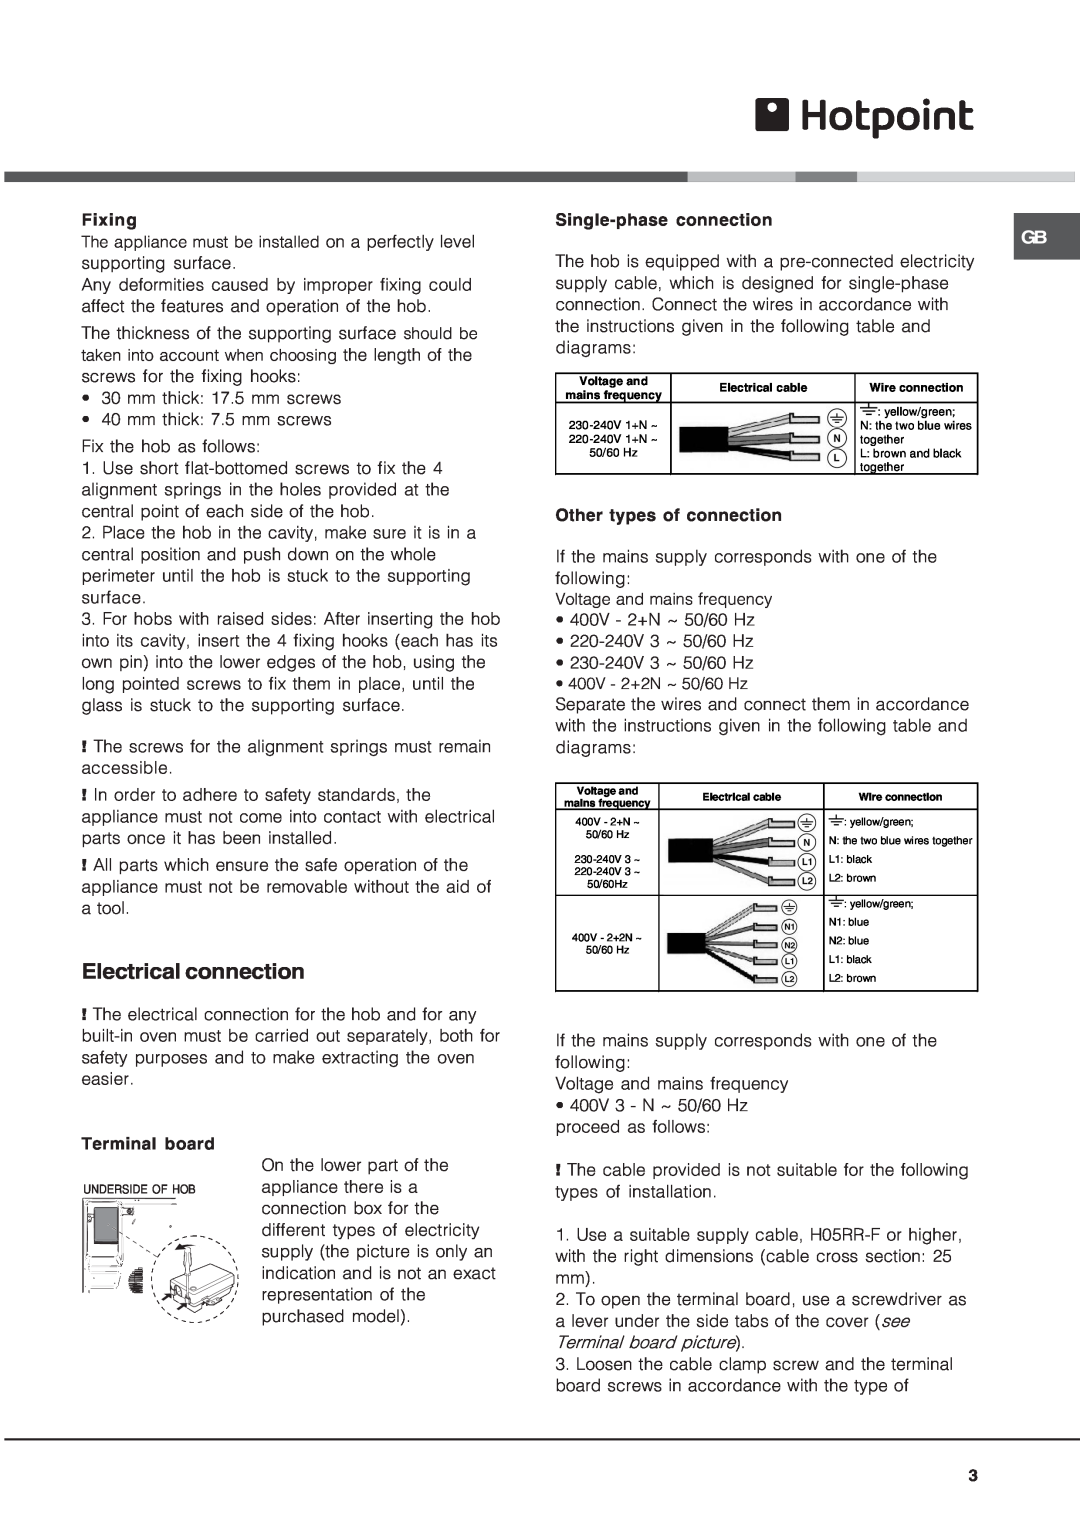 Hotpoint CRA 641 DC operating instructions Electrical connection 